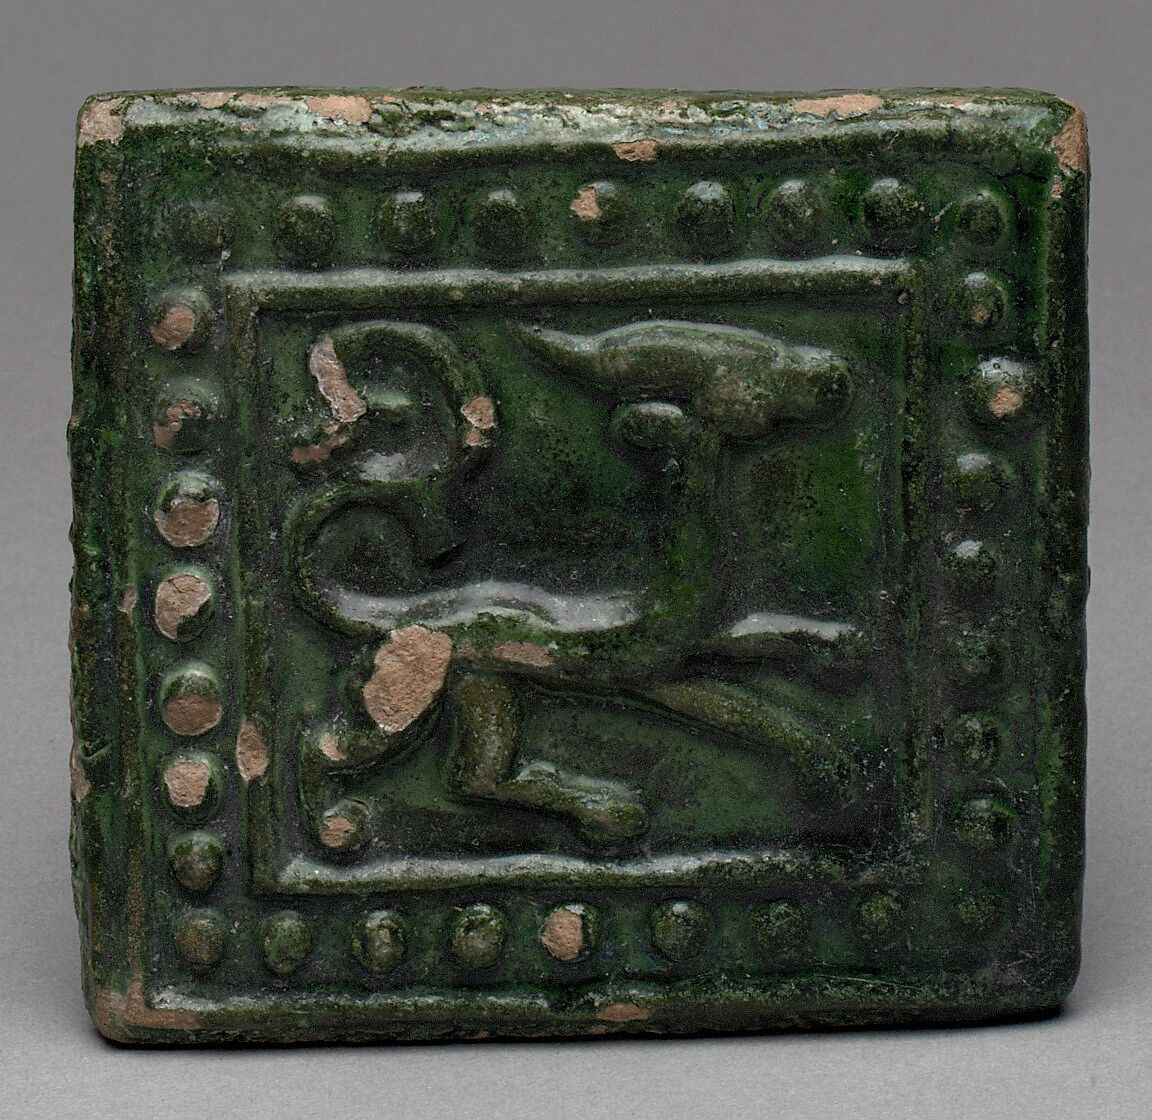 Square Tile, Earthenware; molded and monochrome glazed 